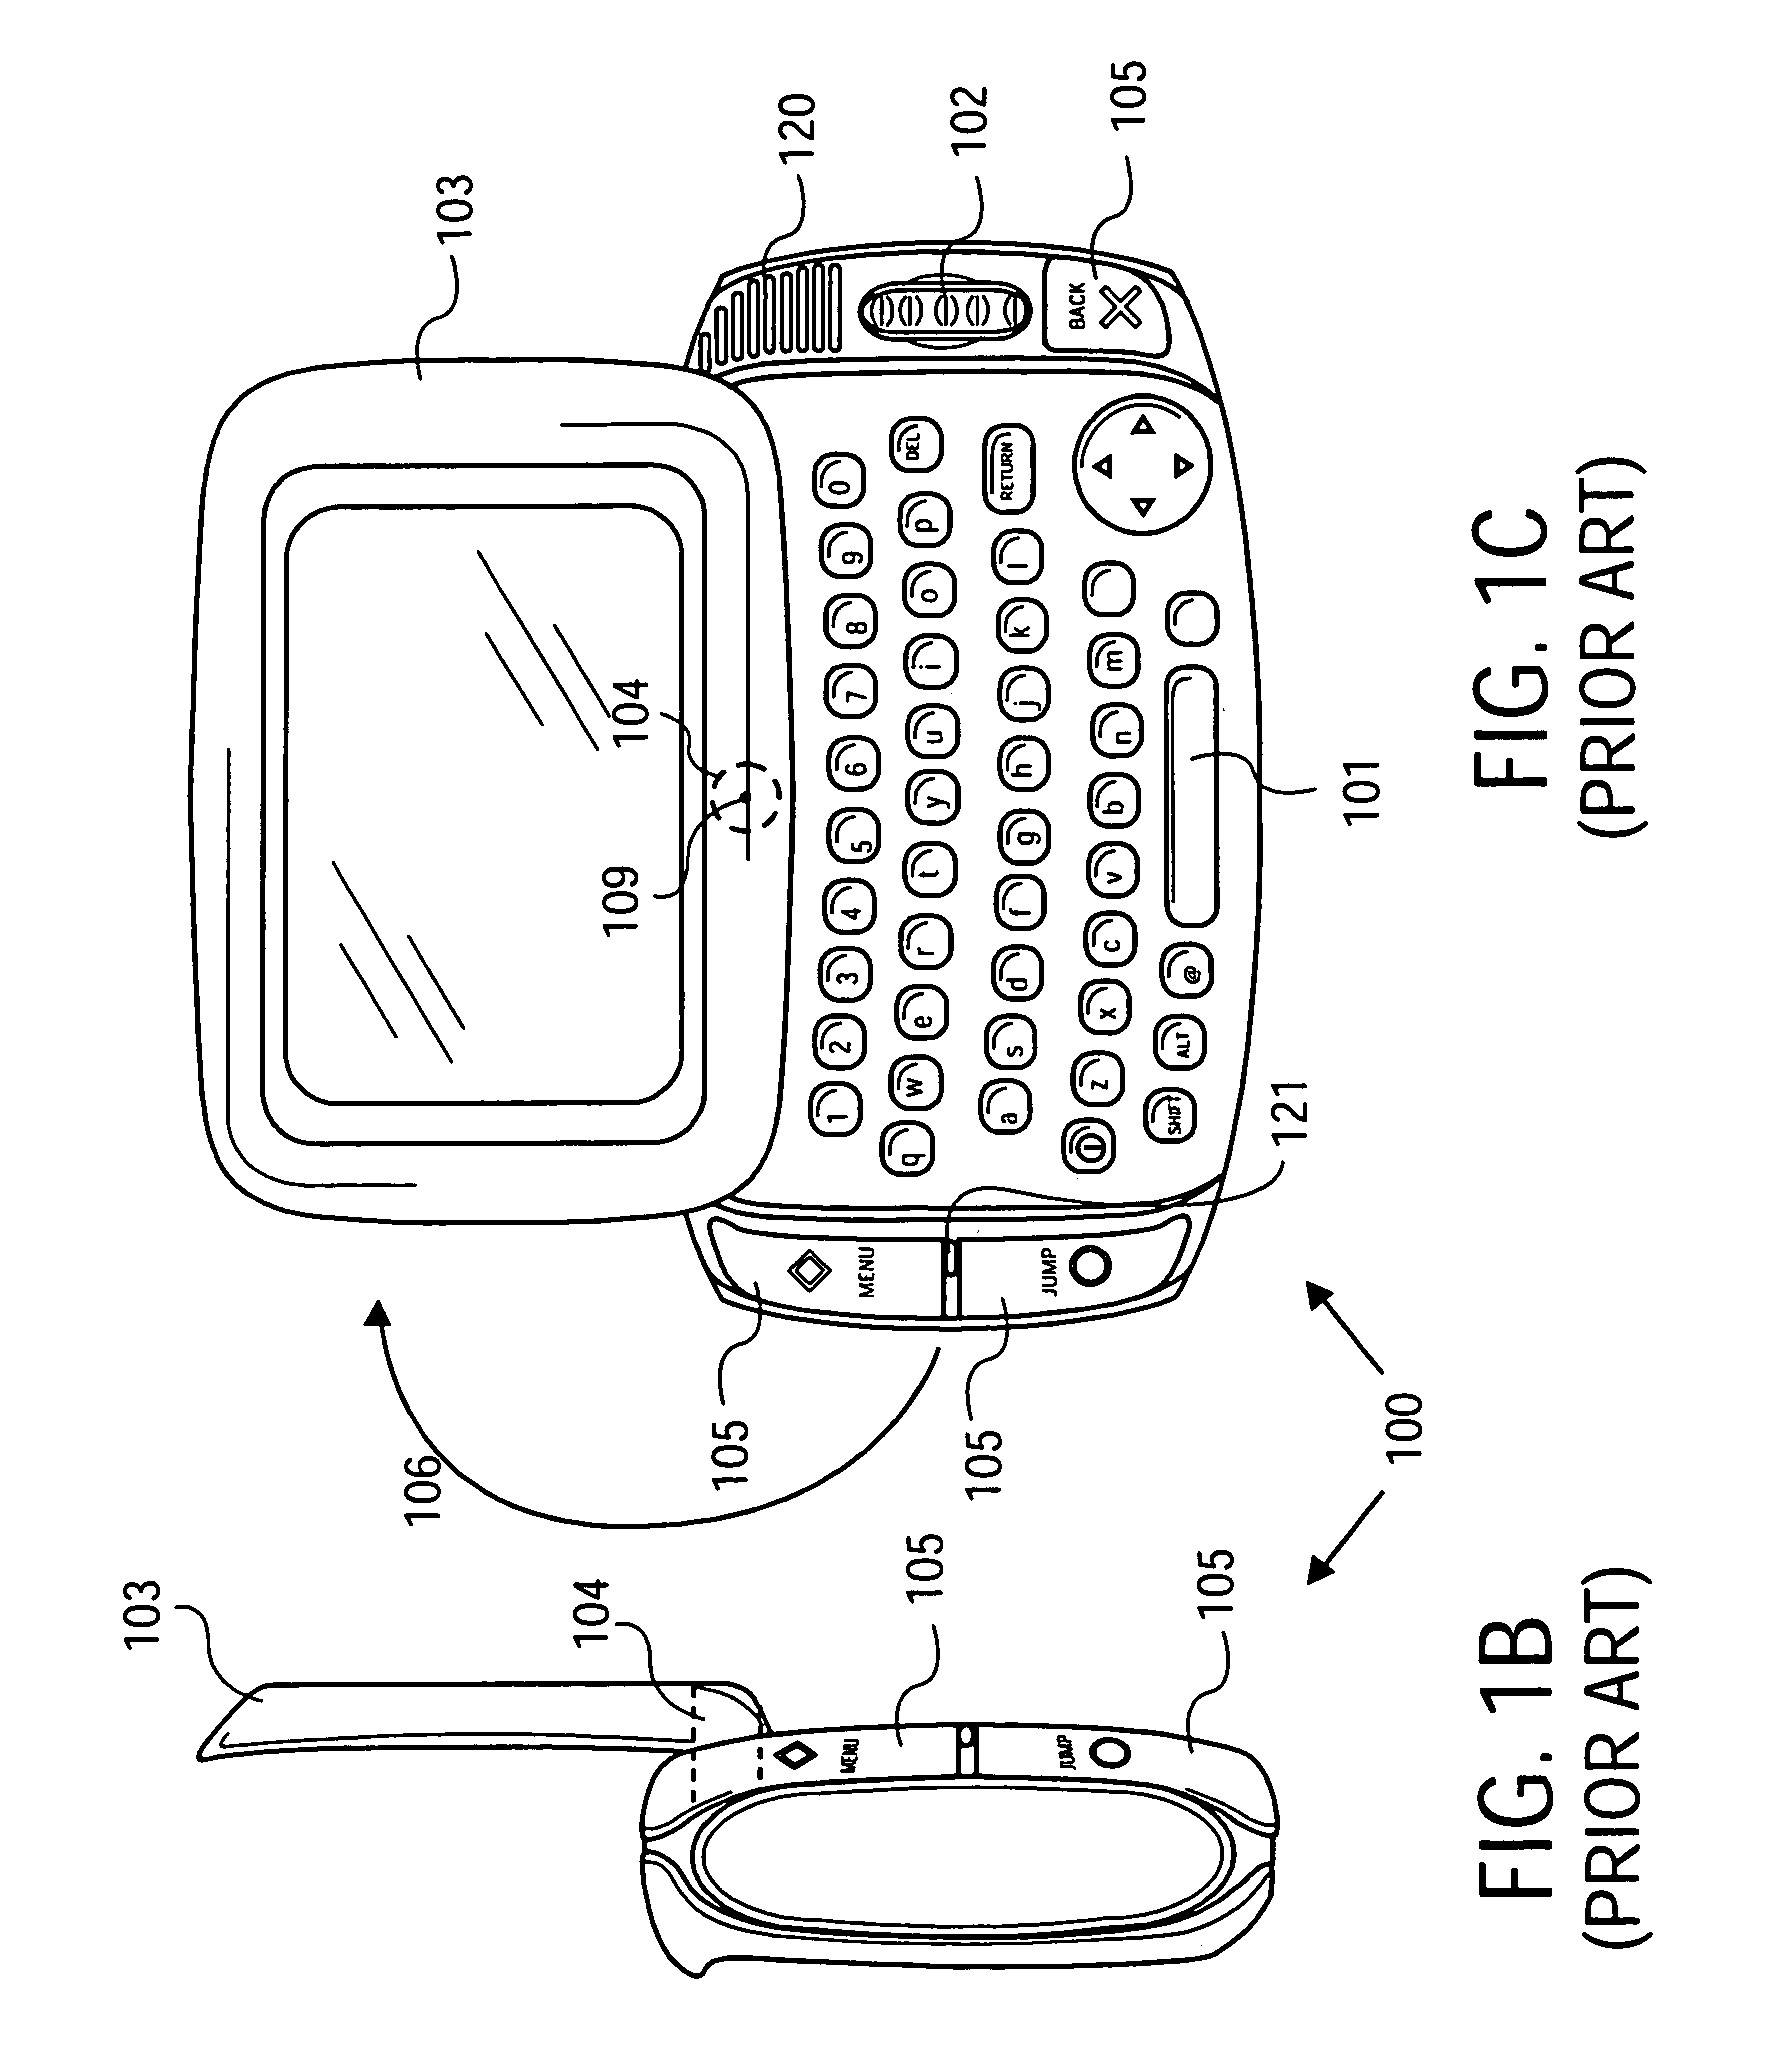 Data processing device having multiple adjustable display and keyboard orientations